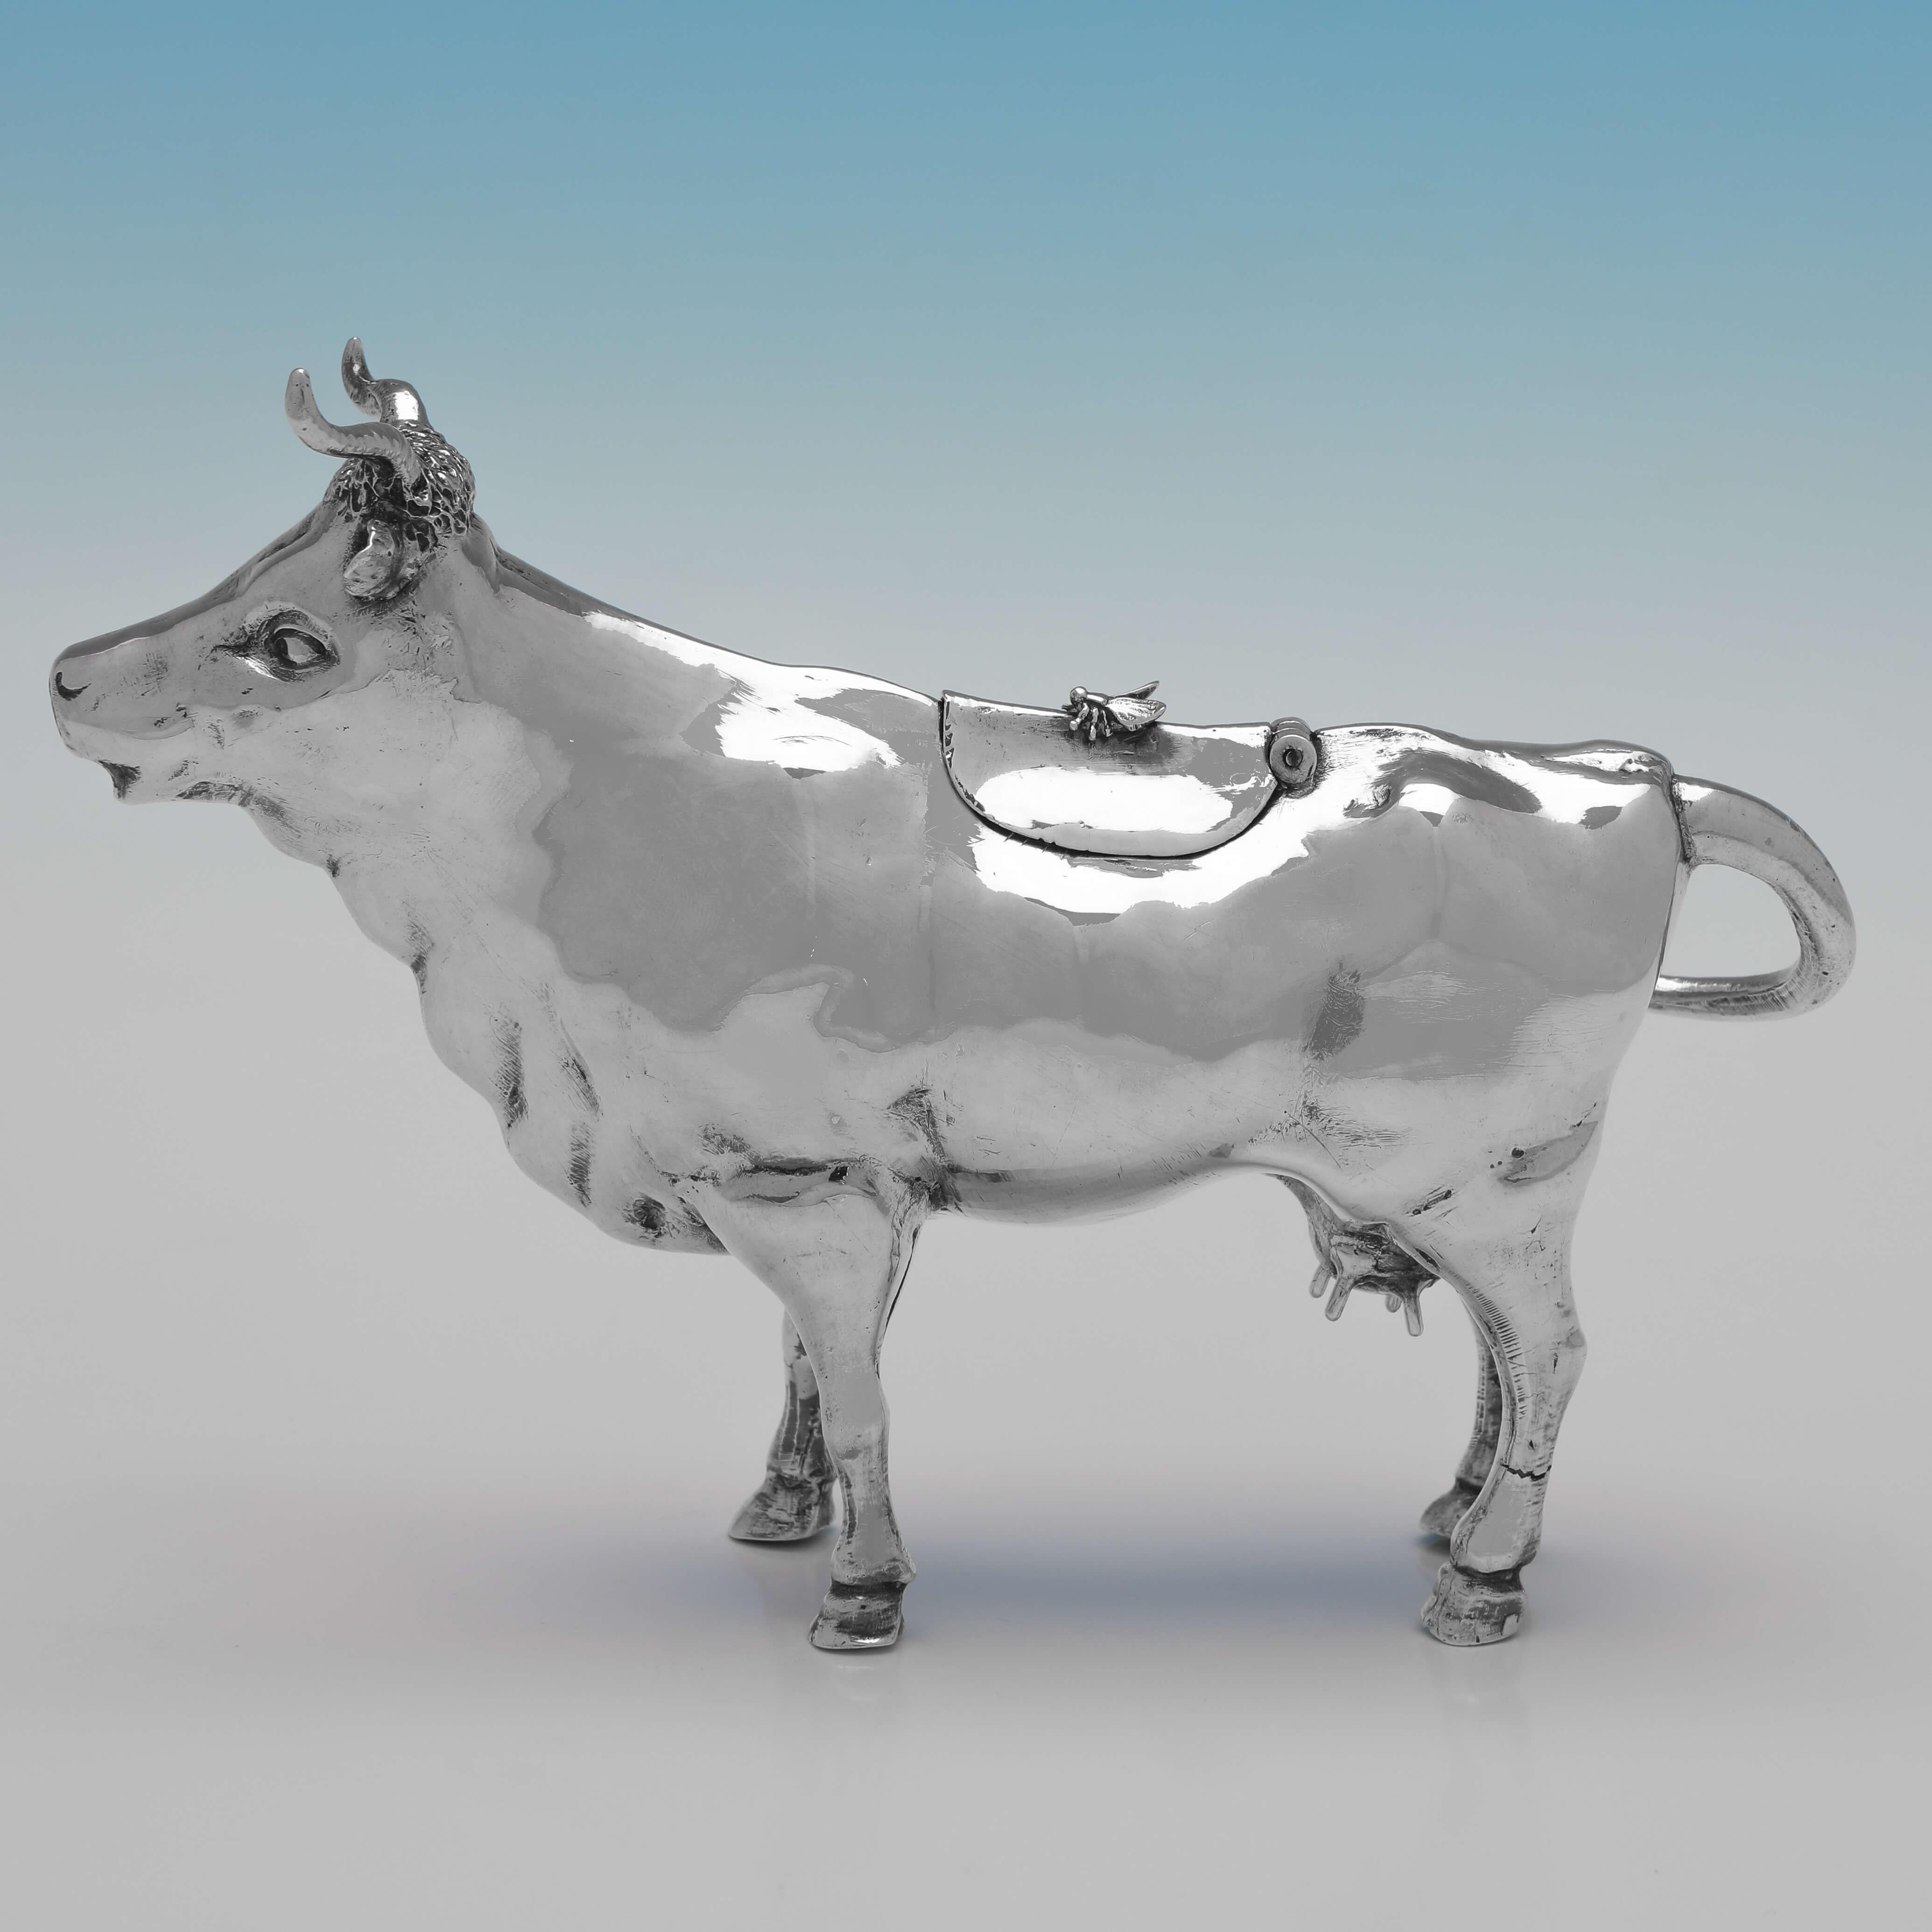 Carrying import marks for London in 1896 by Edwin Thompson Bryant, this charming, Antique Sterling Silver Cow Creamer, is handsomely modelled. 

The cow creamer measures 4.75